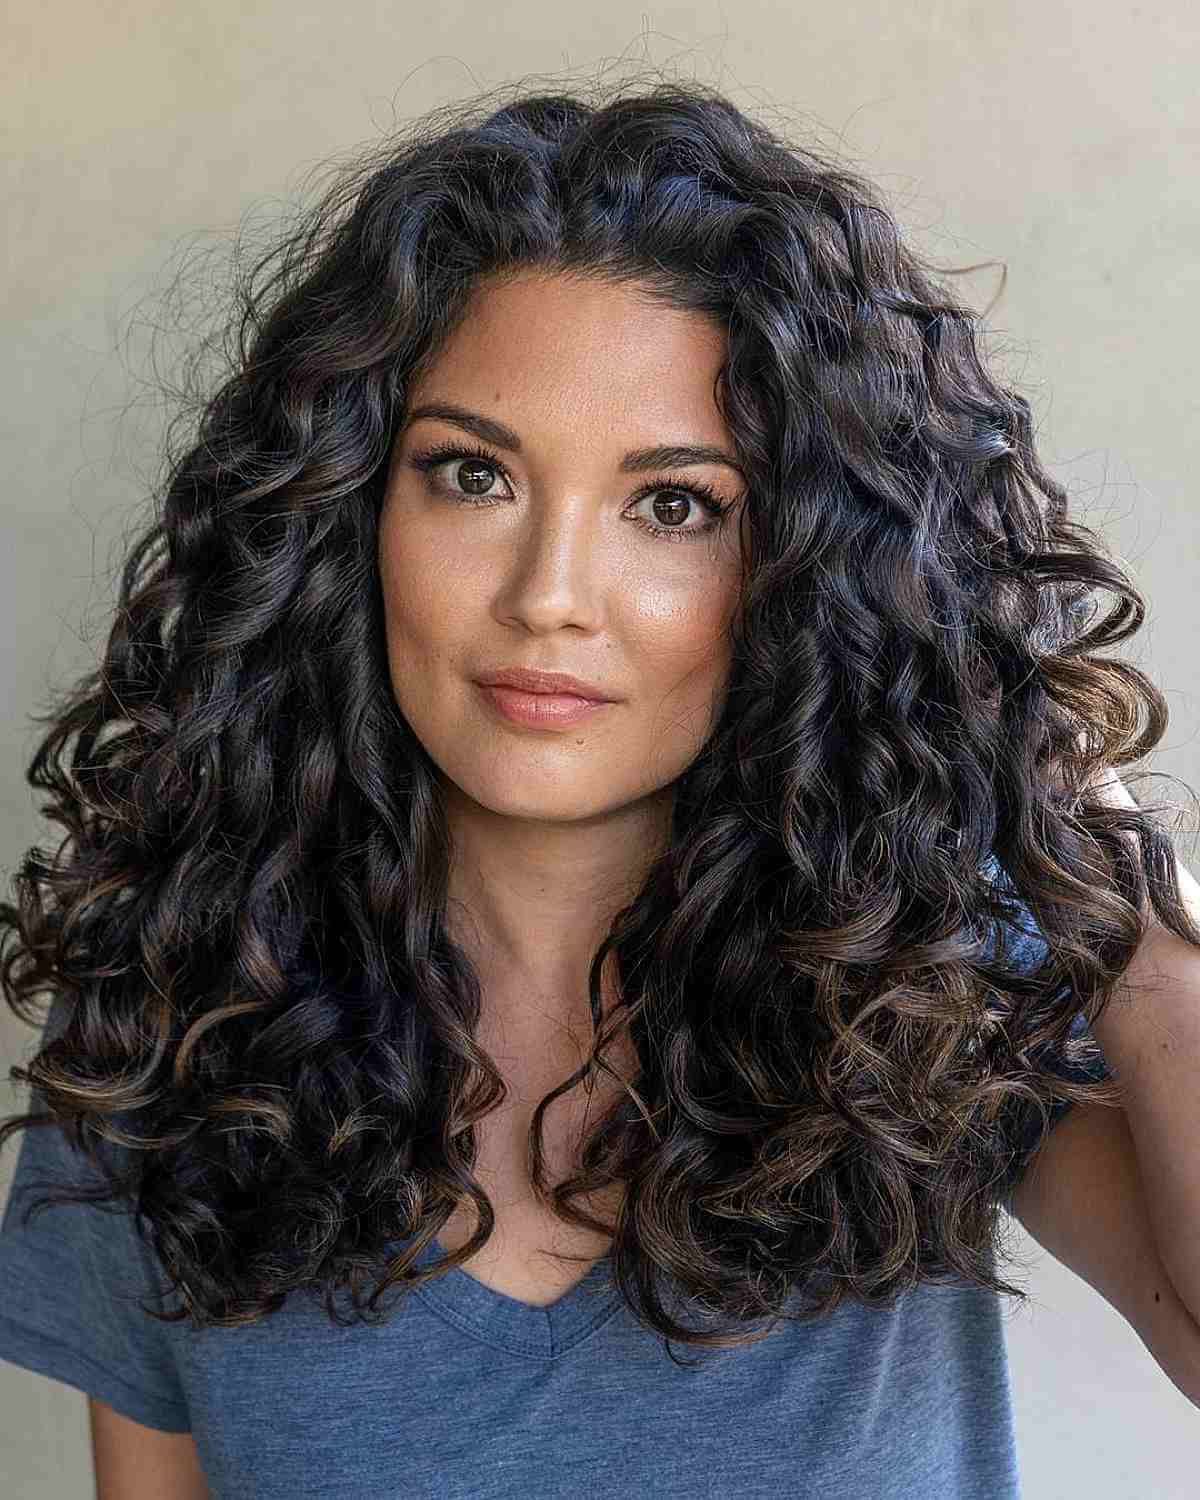 62 Best Shoulder Length Curly Hair Cuts & Styles In 2022 Pertaining To Most Up To Date Layered Curly Medium Length Hairstyles (View 3 of 25)